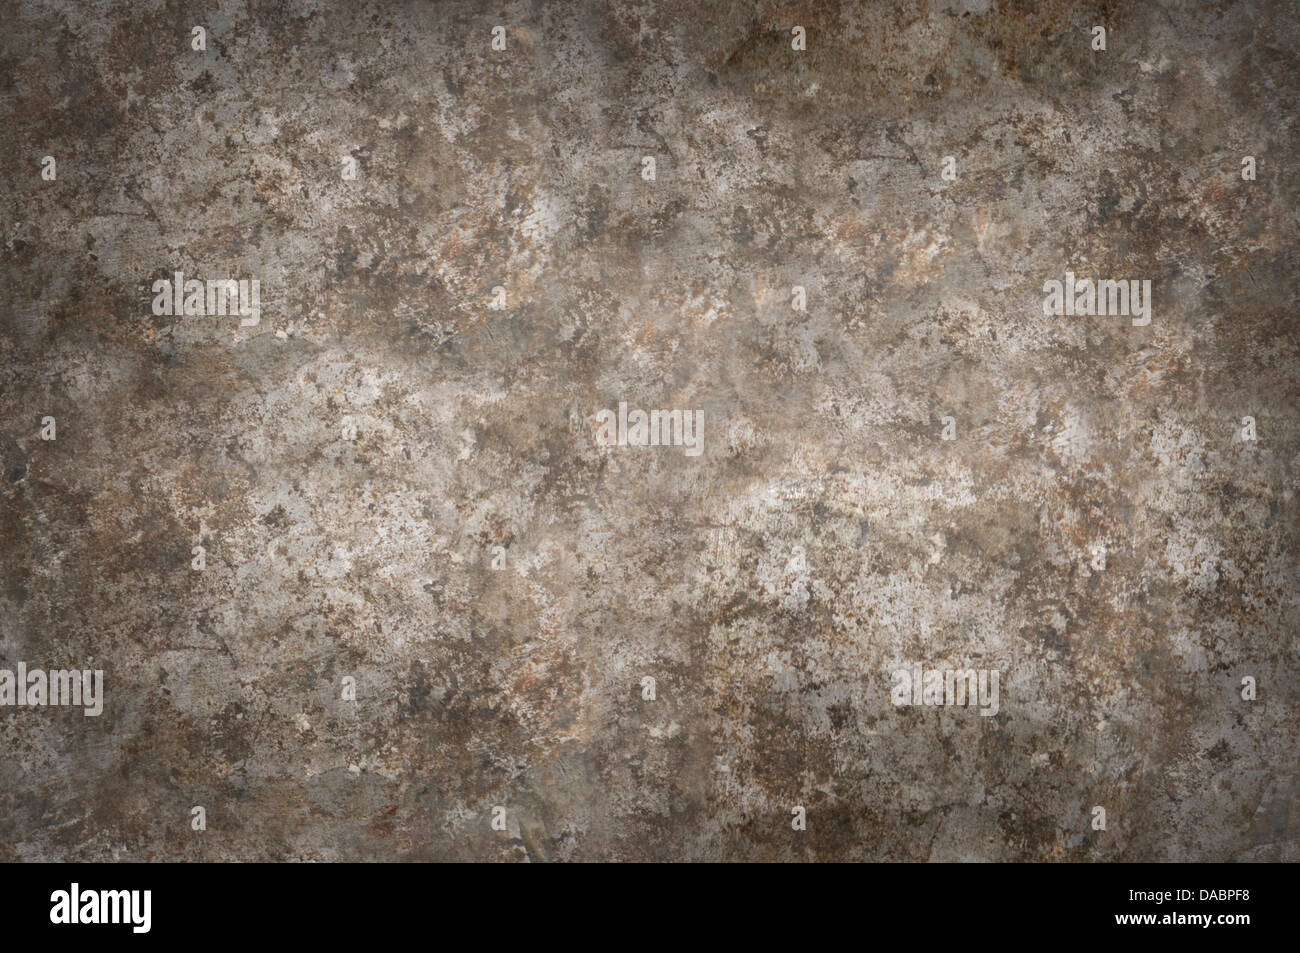 Distressed gray metal surface texture Stock Photo